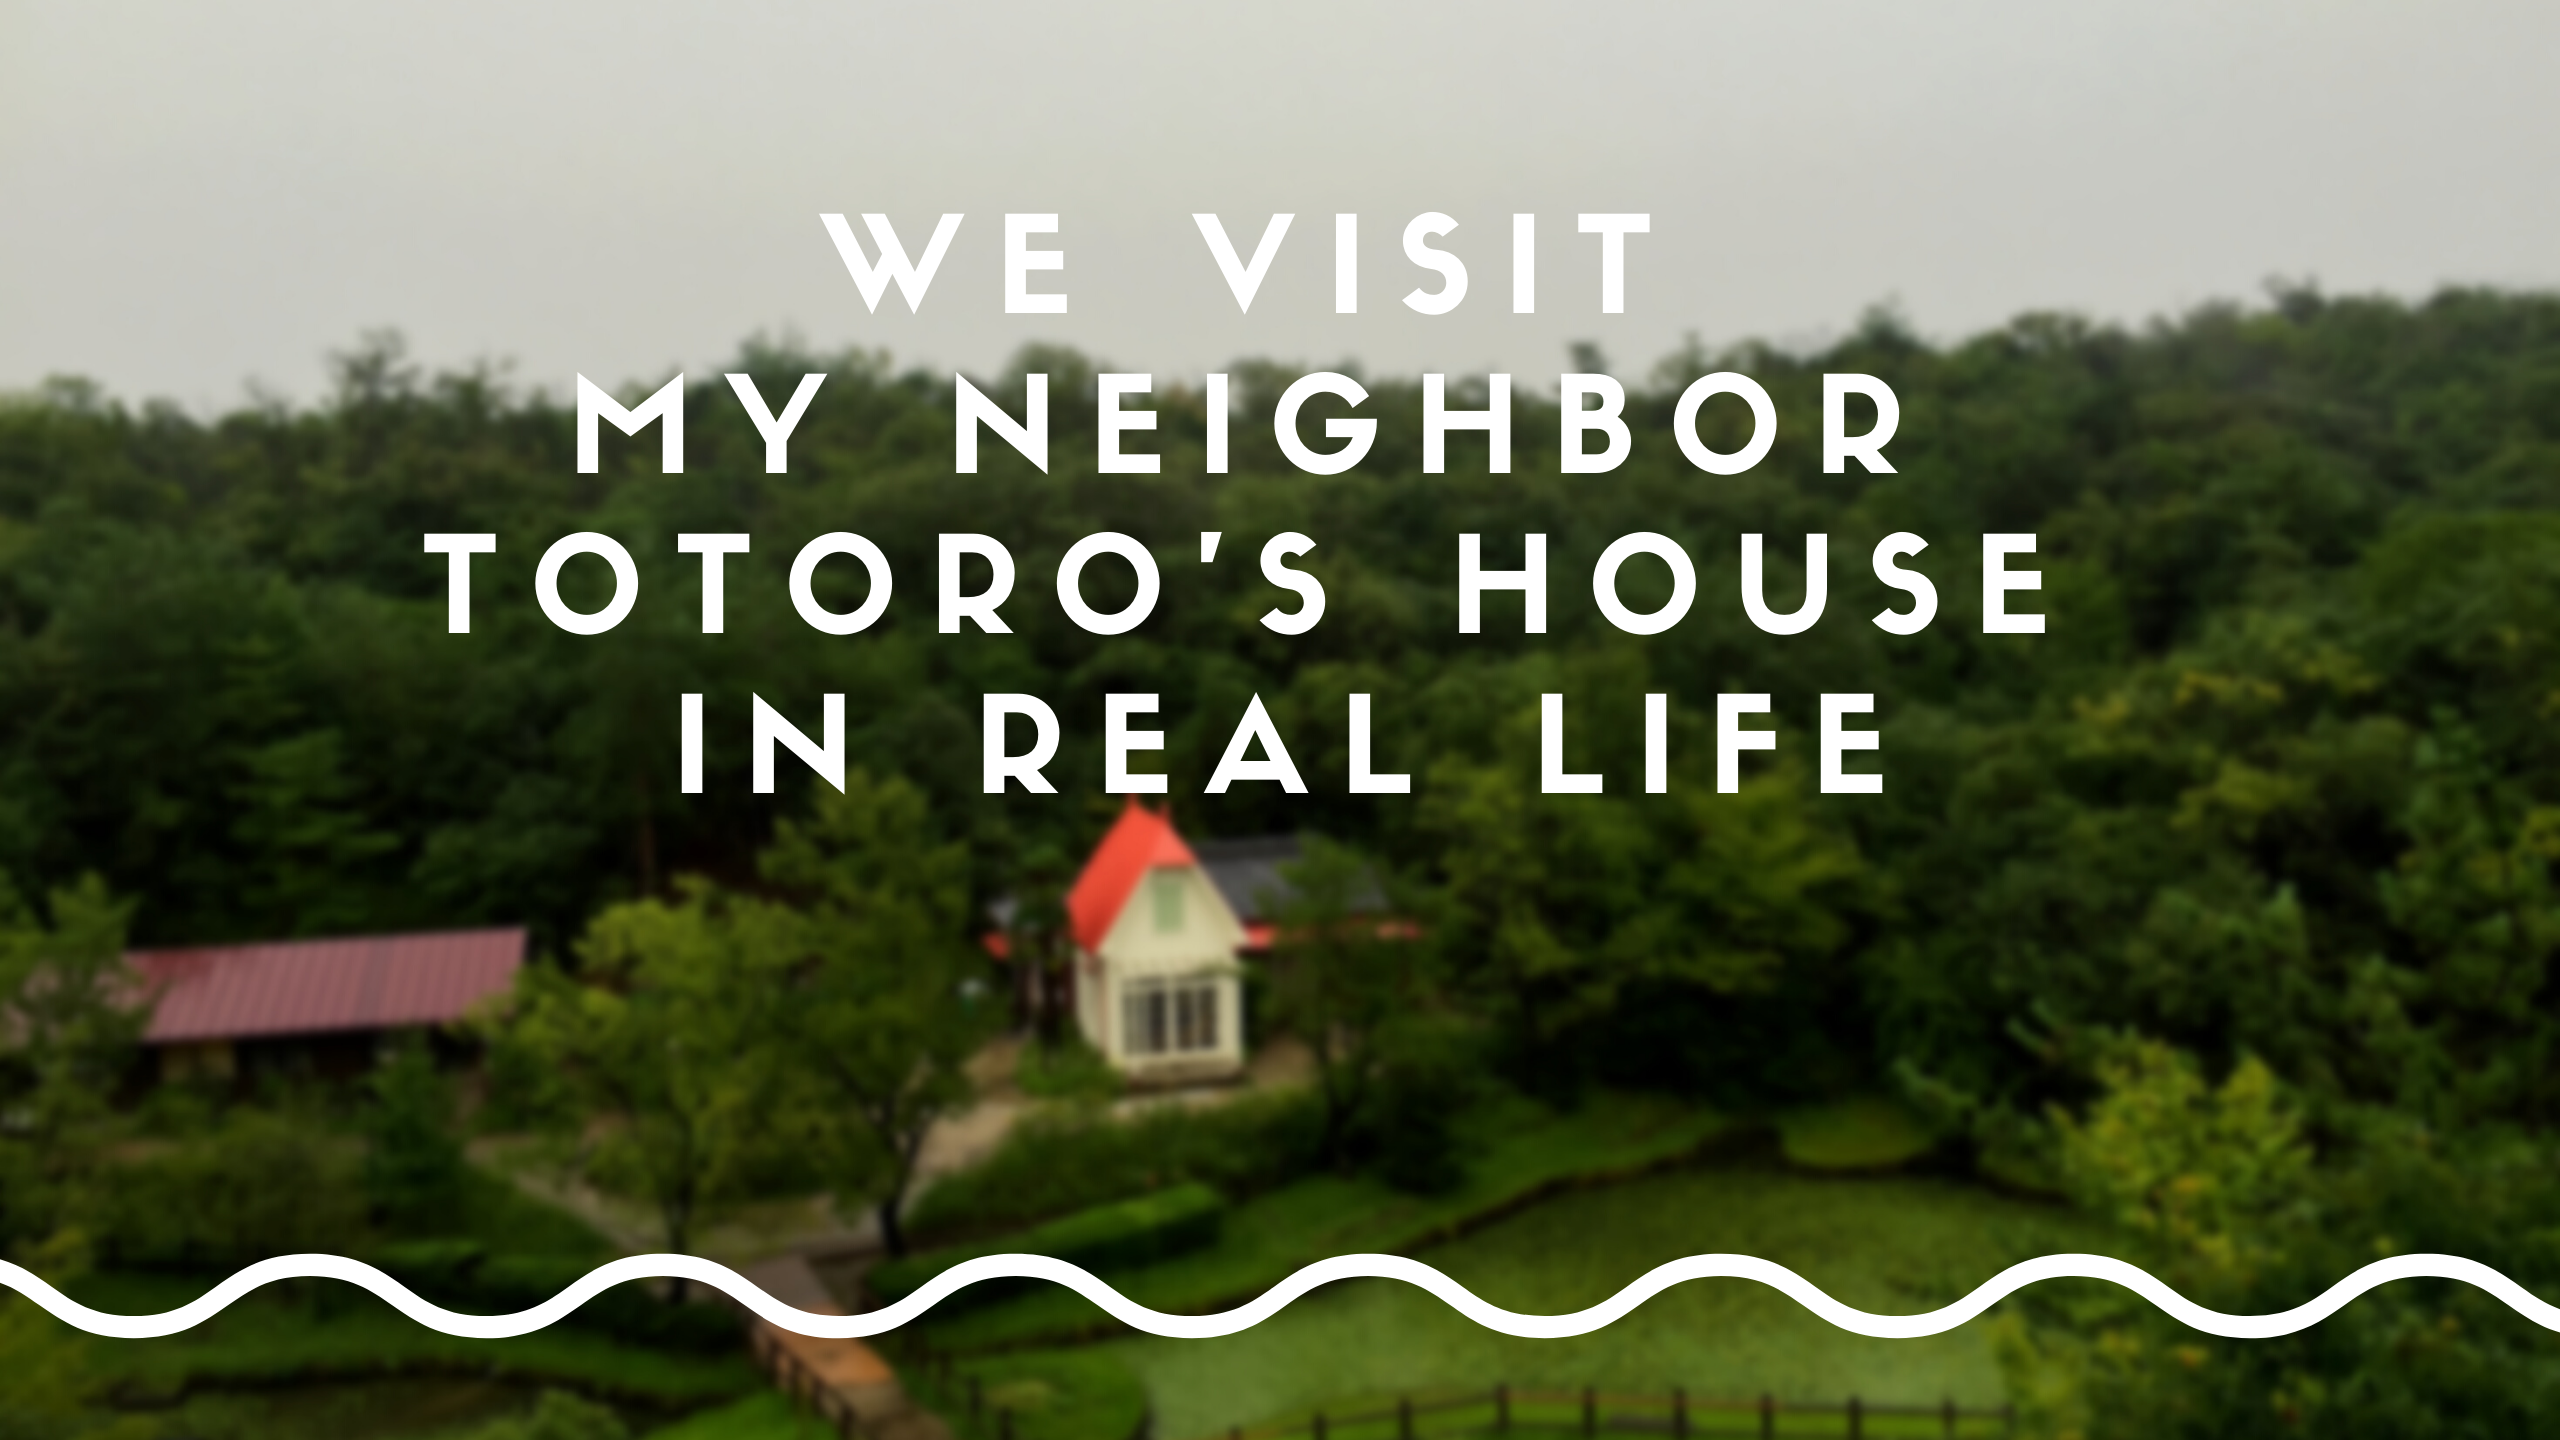 We Visit My Neighbor Totoro’s House in Real Life